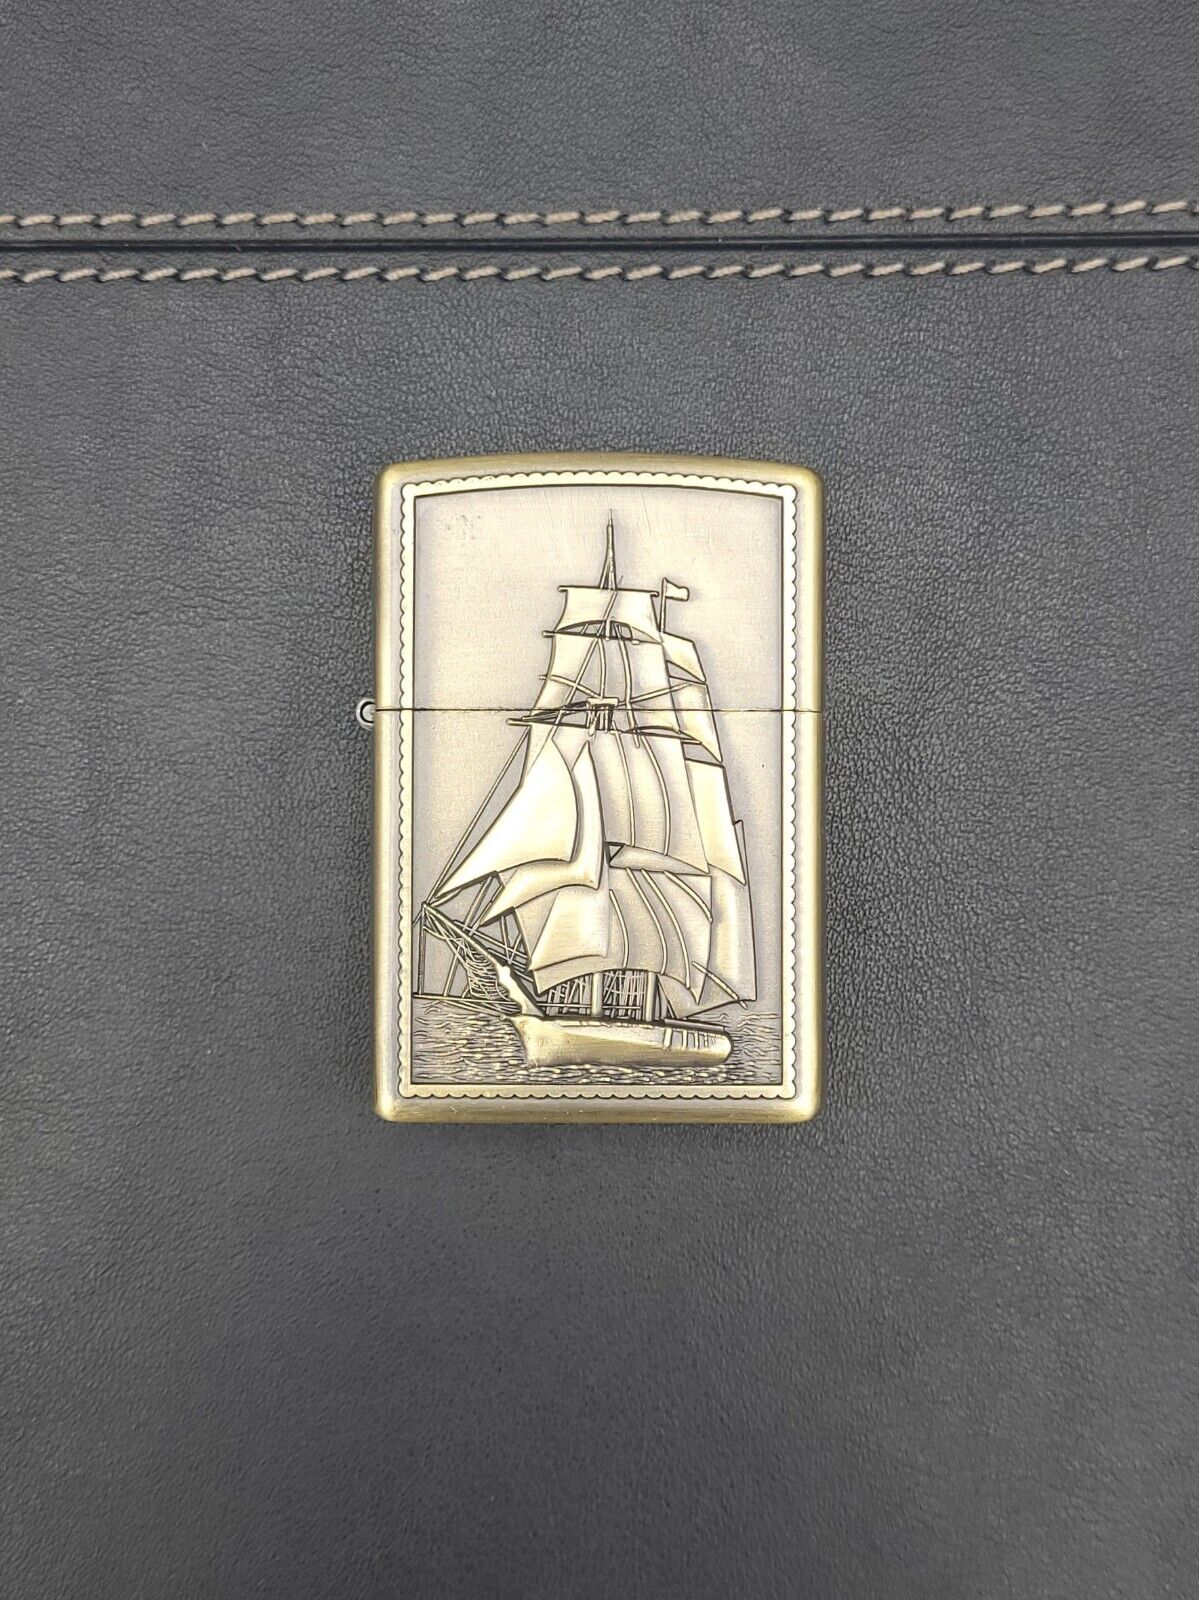 Vintage Ship / Sail Boat Design Lighter Brass Finish-  Compatible With Zippo NEW